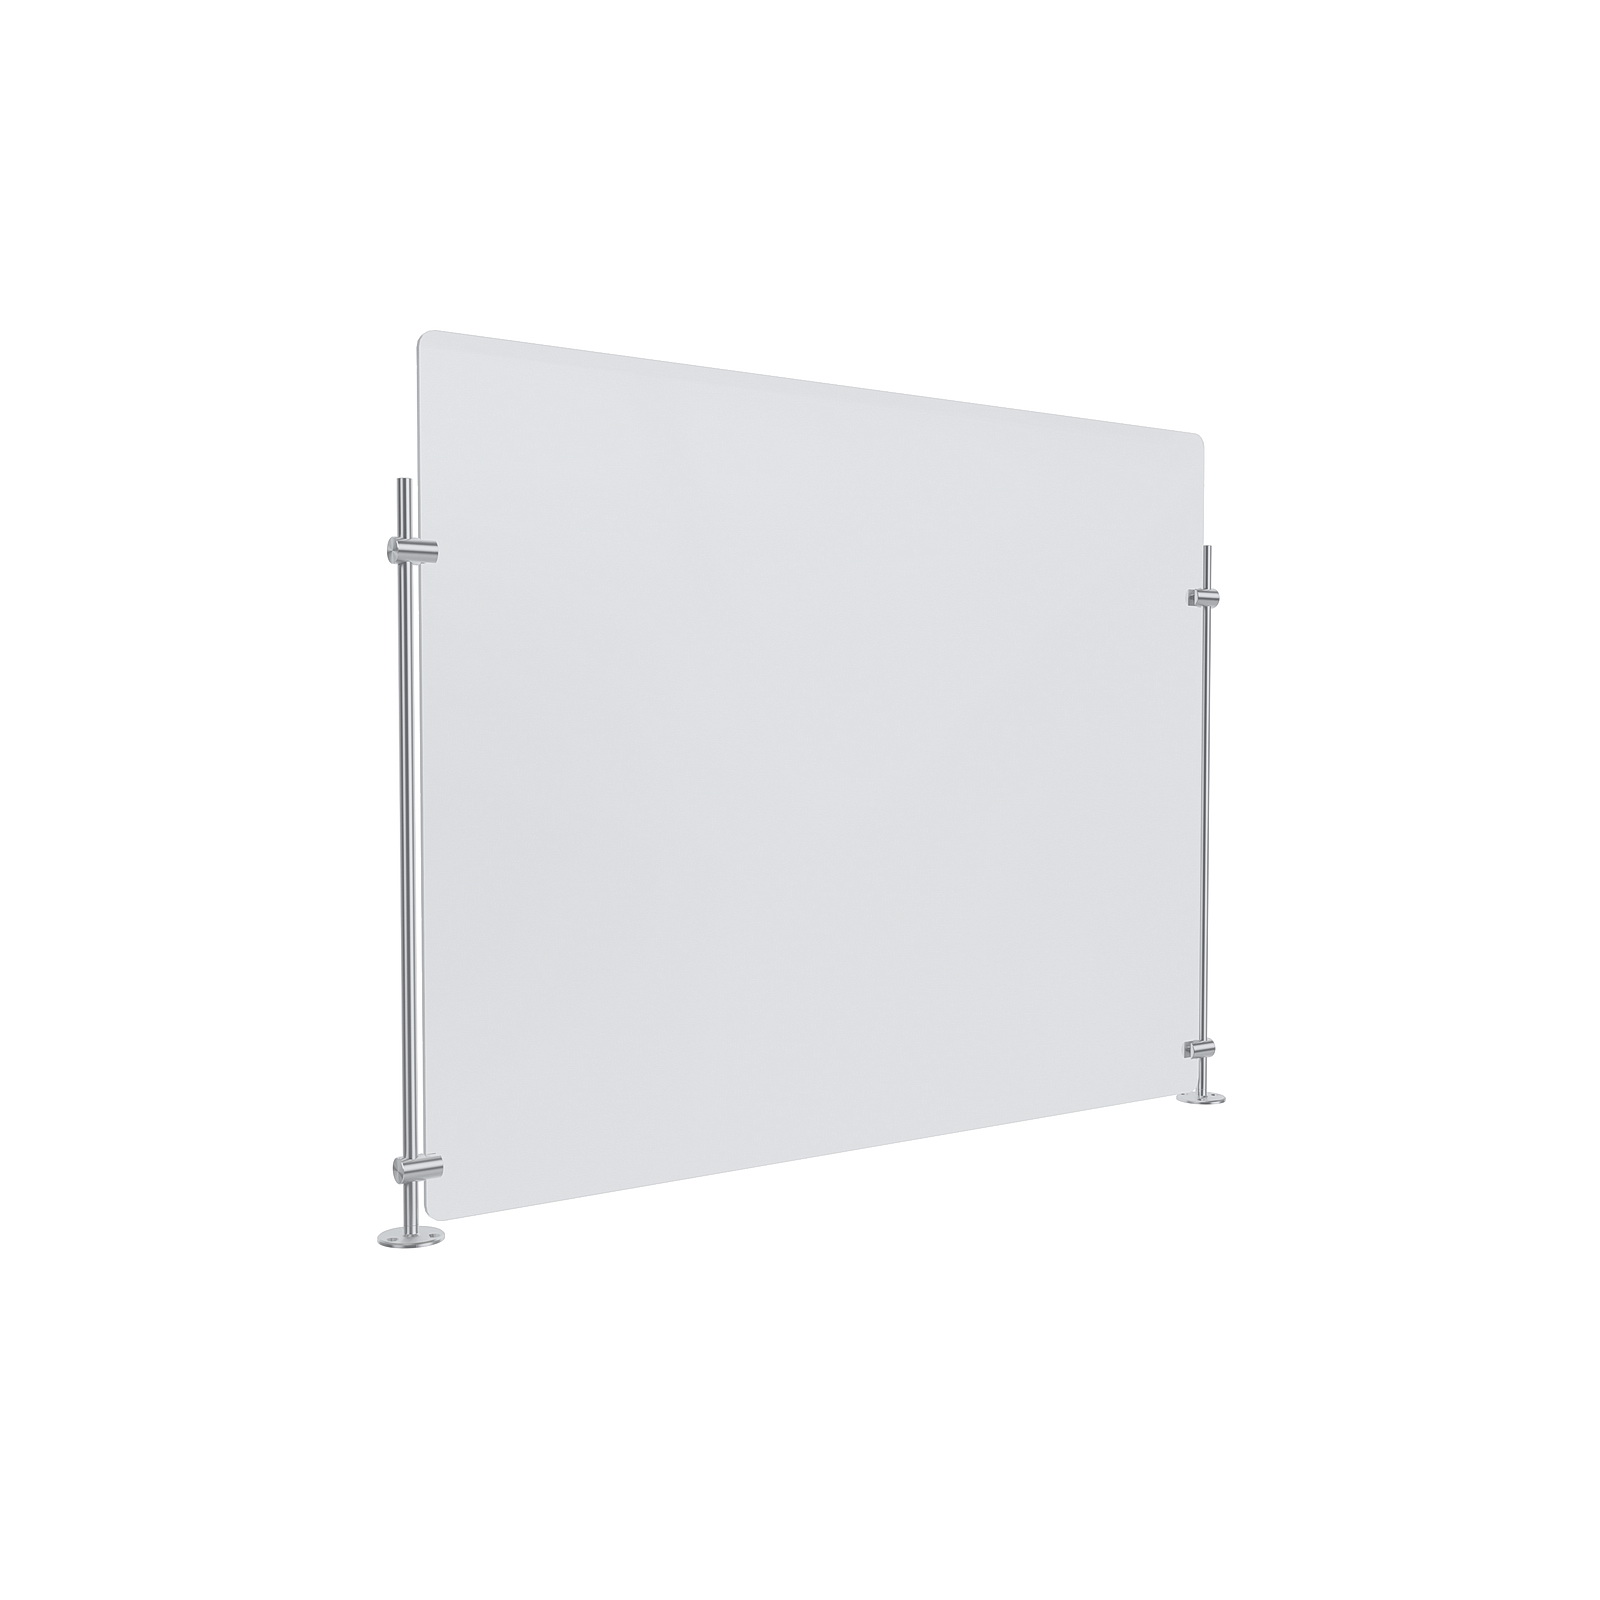 Clear Acrylic Sneeze Guard 30'' Wide x 23-1/2'' Tall, with (2) 20'' Tall x 3/8'' Diameter Clear Anodized Aluminum Rods on the Side.